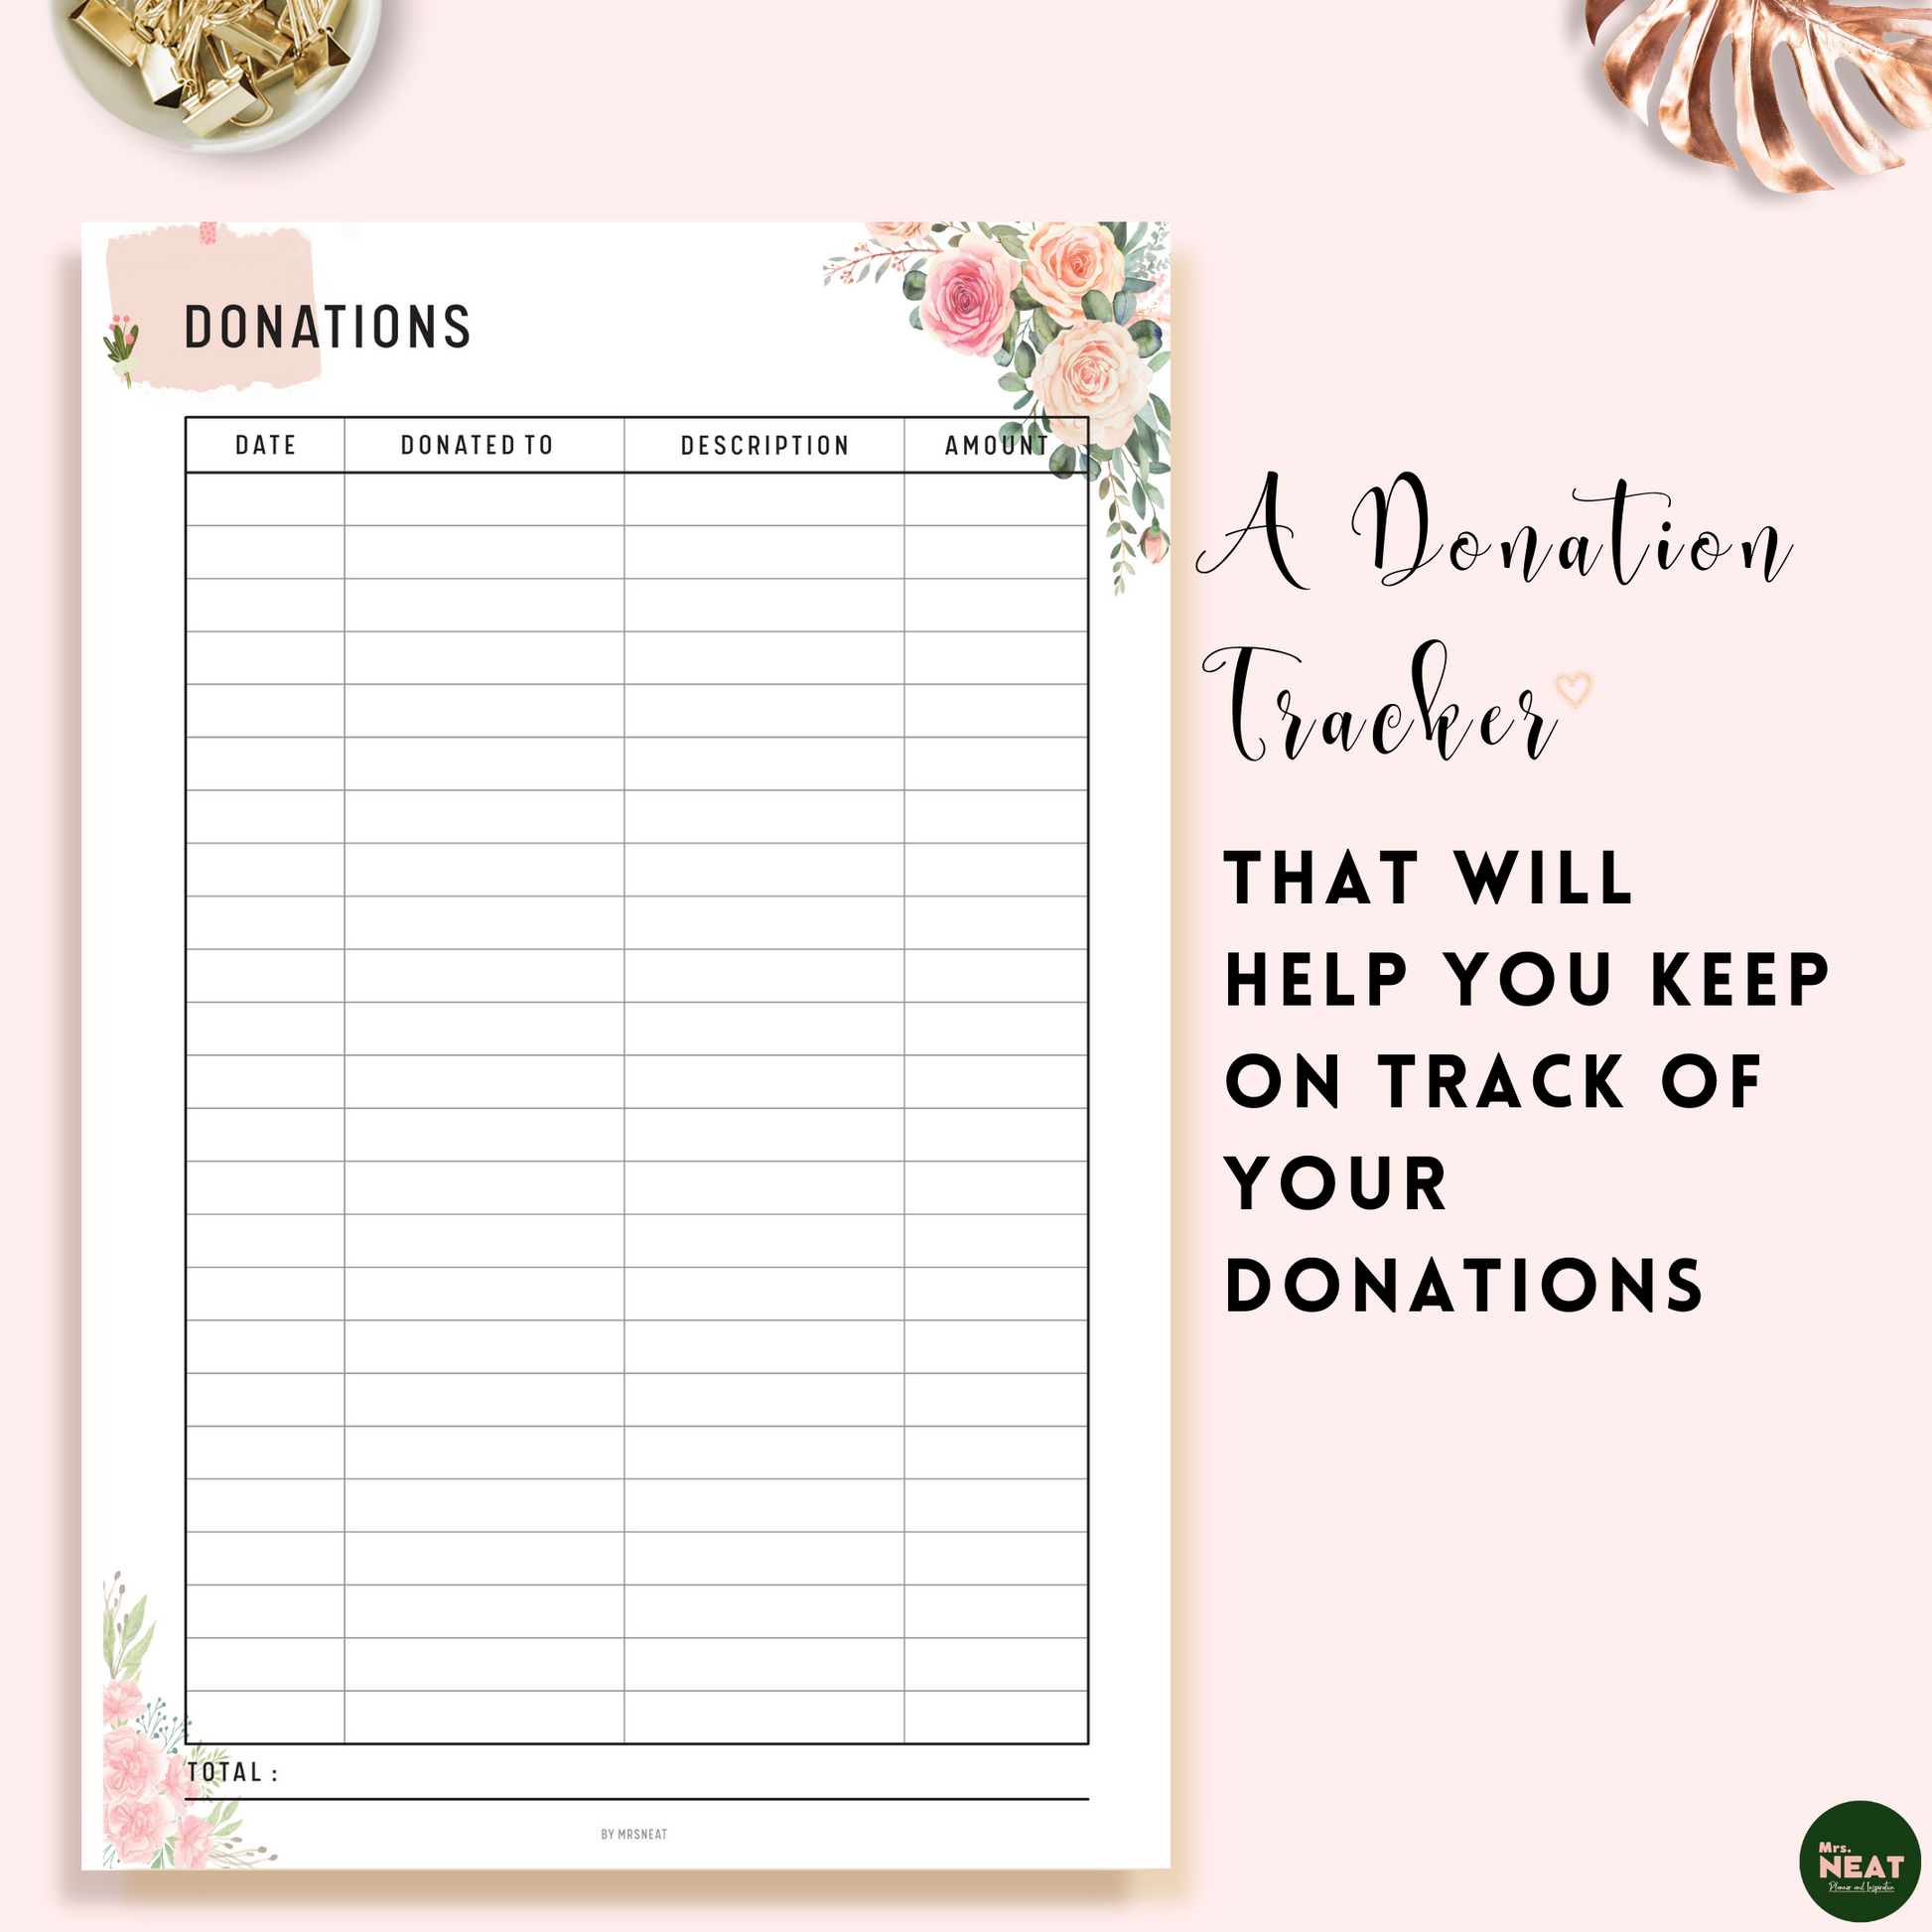 Floral Donation Tracker Planner with room for date, Donated to, Description, amount and total donation